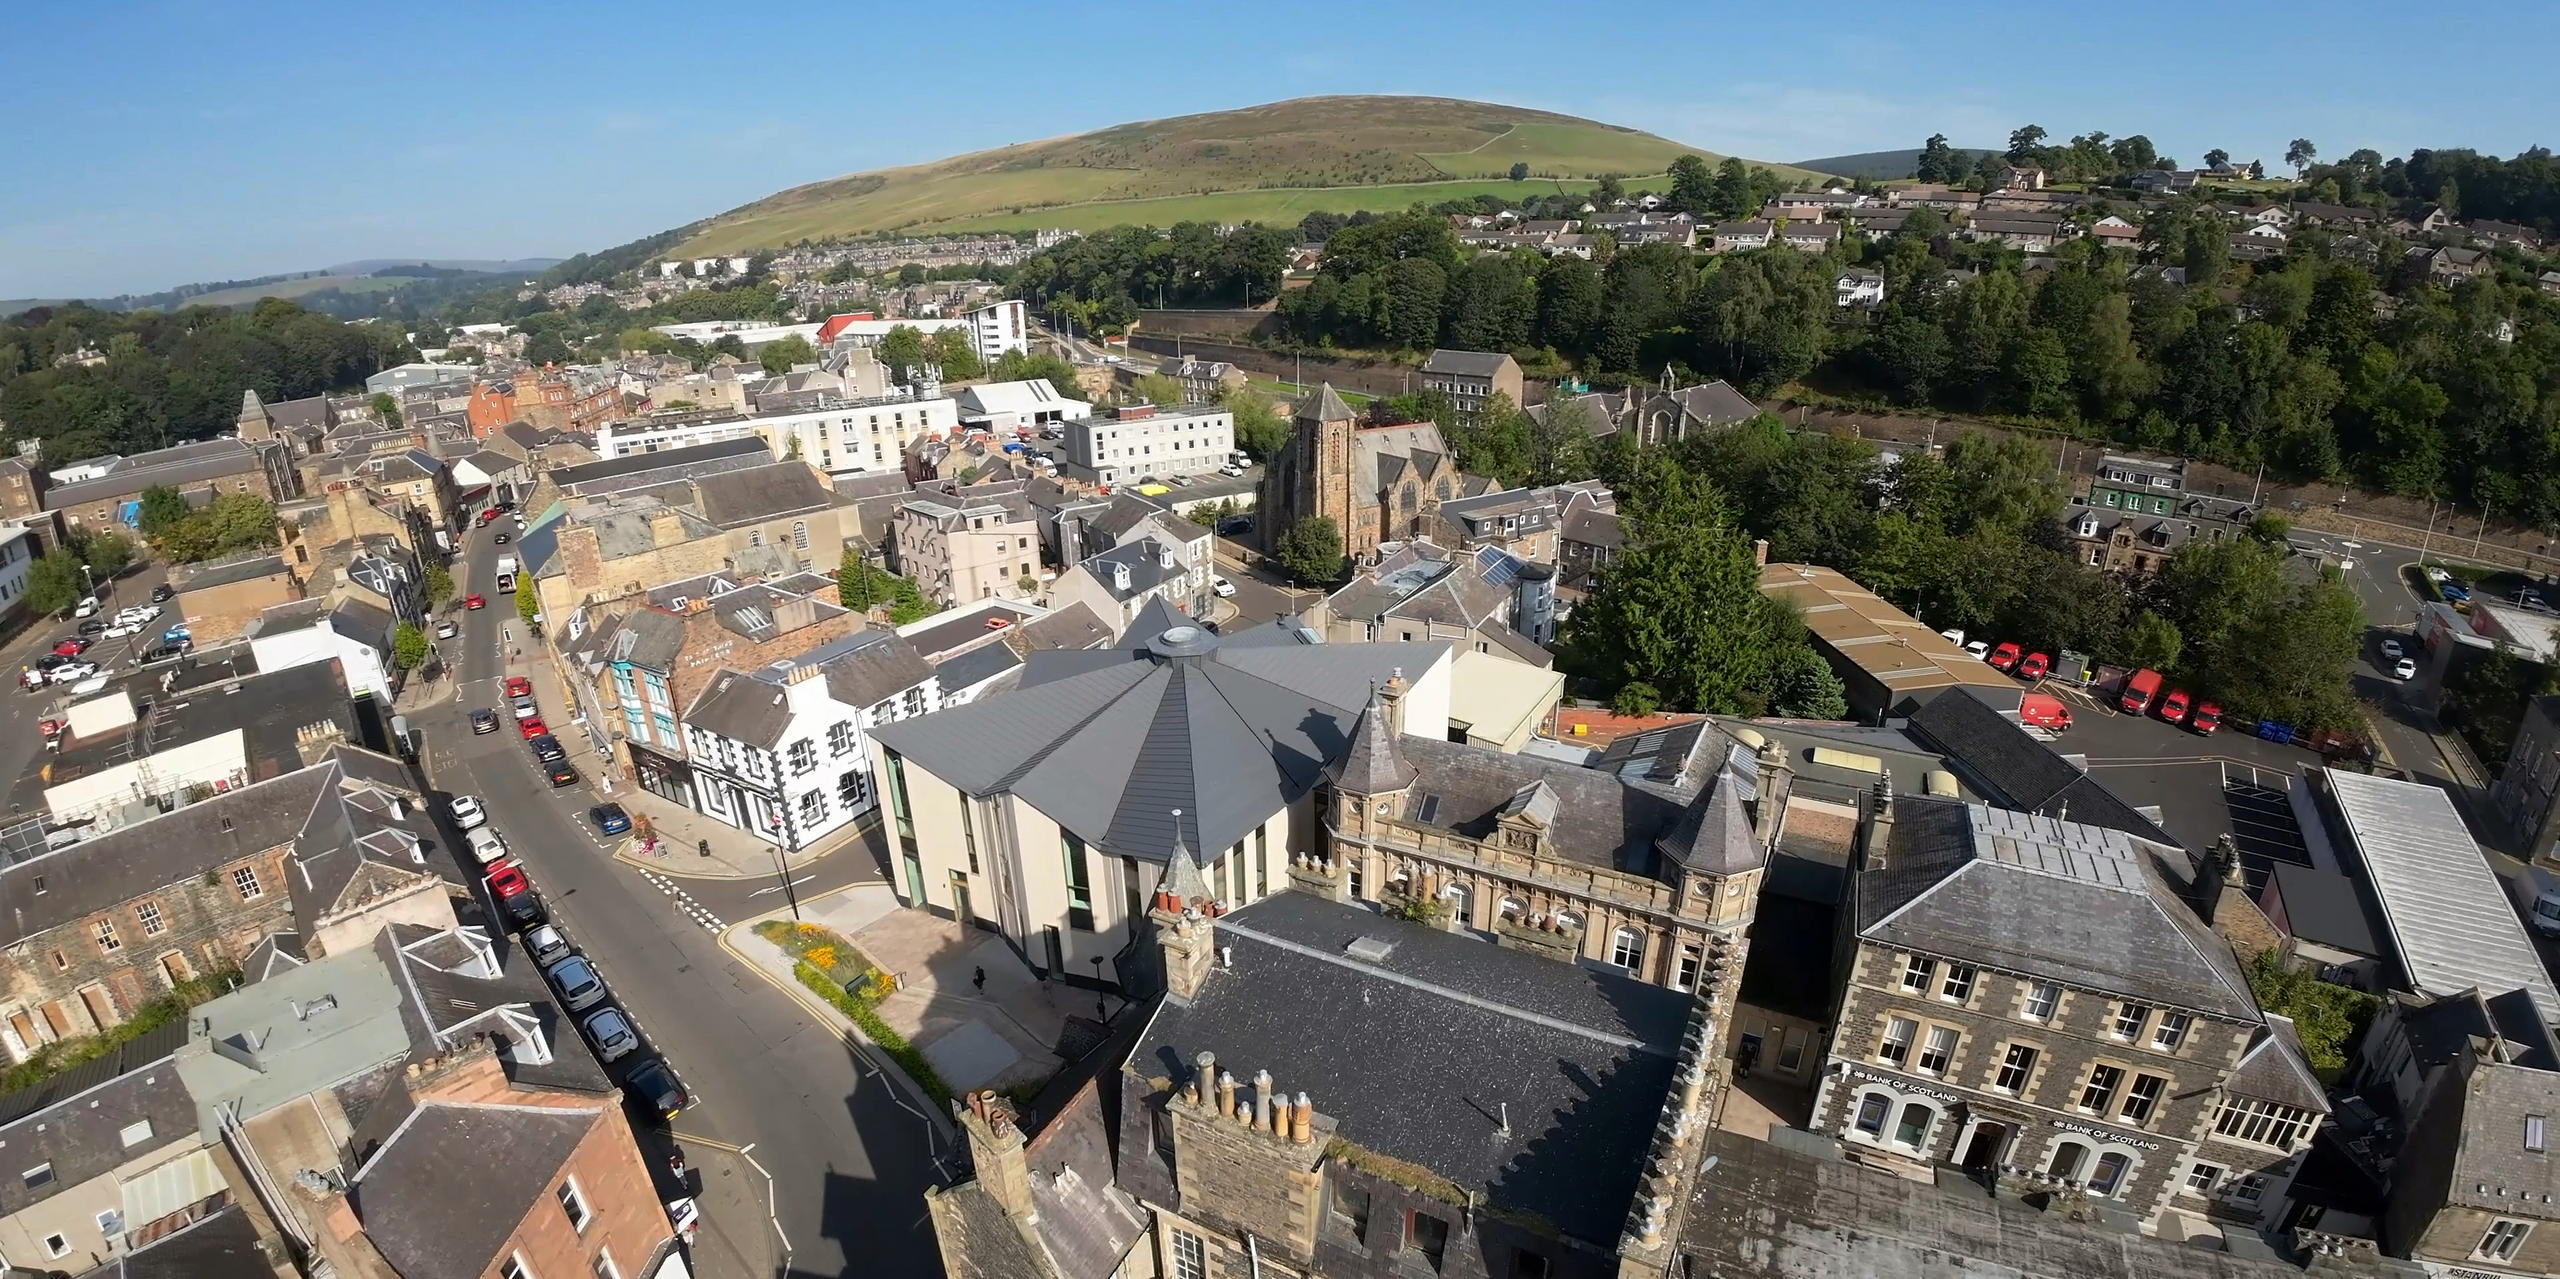 Panoramic drone shot of 'The Great Tapestry of Scotland' gallery/visitor centre in Galashiels, framed by the picturesque Scottish hills. The striking building stands out with its PREFALZ roof system in P.10 Zinc Grey, which curves elegantly over the unique structure. The unusual lines of the roof clearly stand out from the surrounding traditional buildings and show how PREFA aluminium products combine modern architecture with the city's cultural heritage.